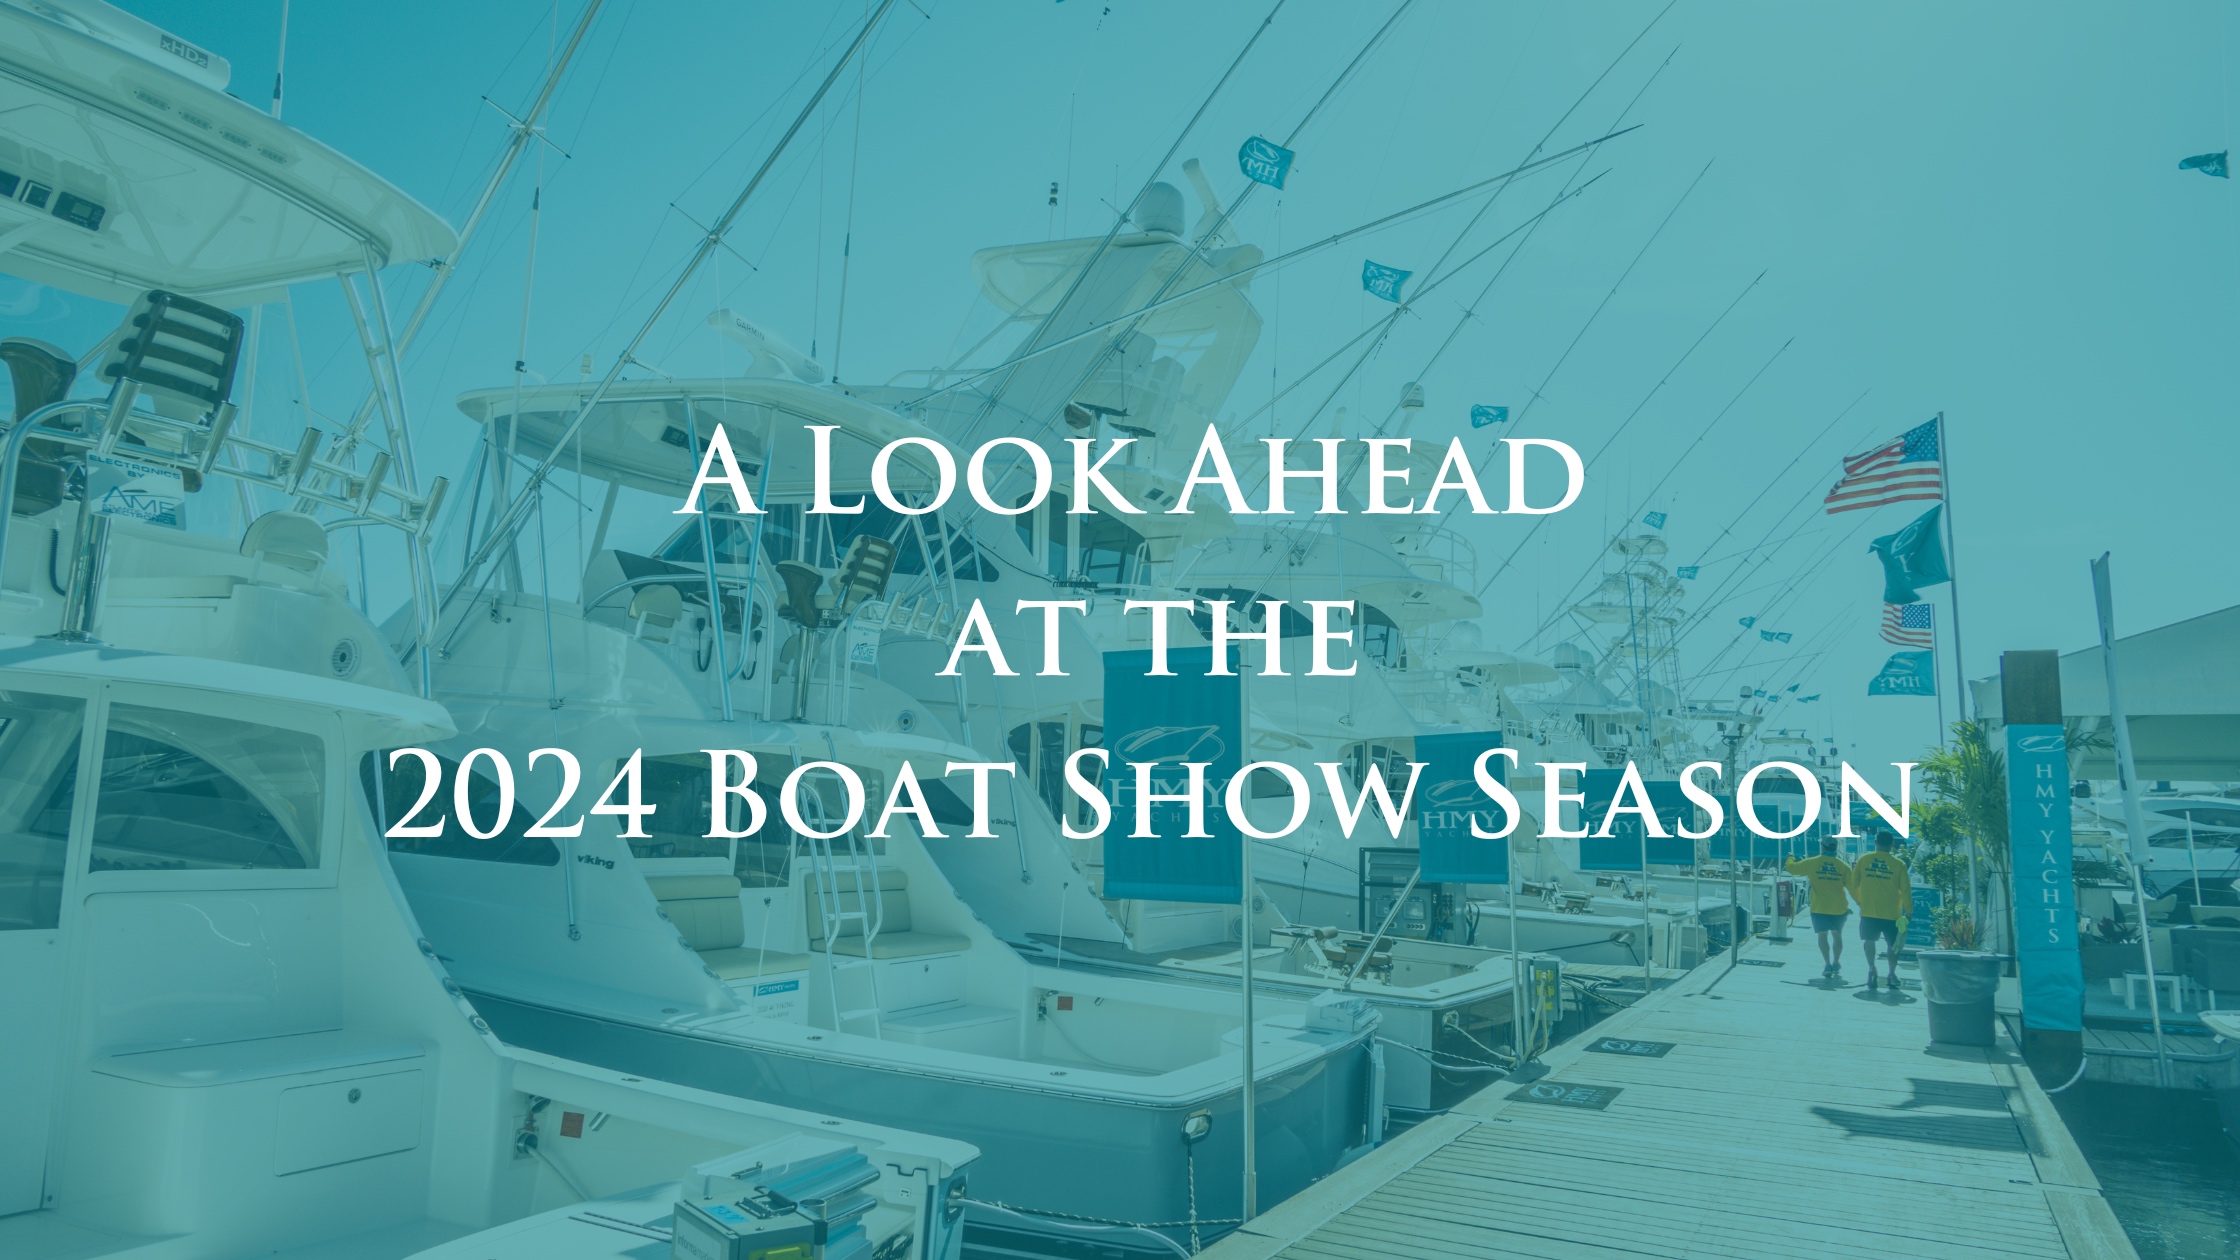 Mark Your Calendars: A Look at the 2024 Boat Show Season With HMY